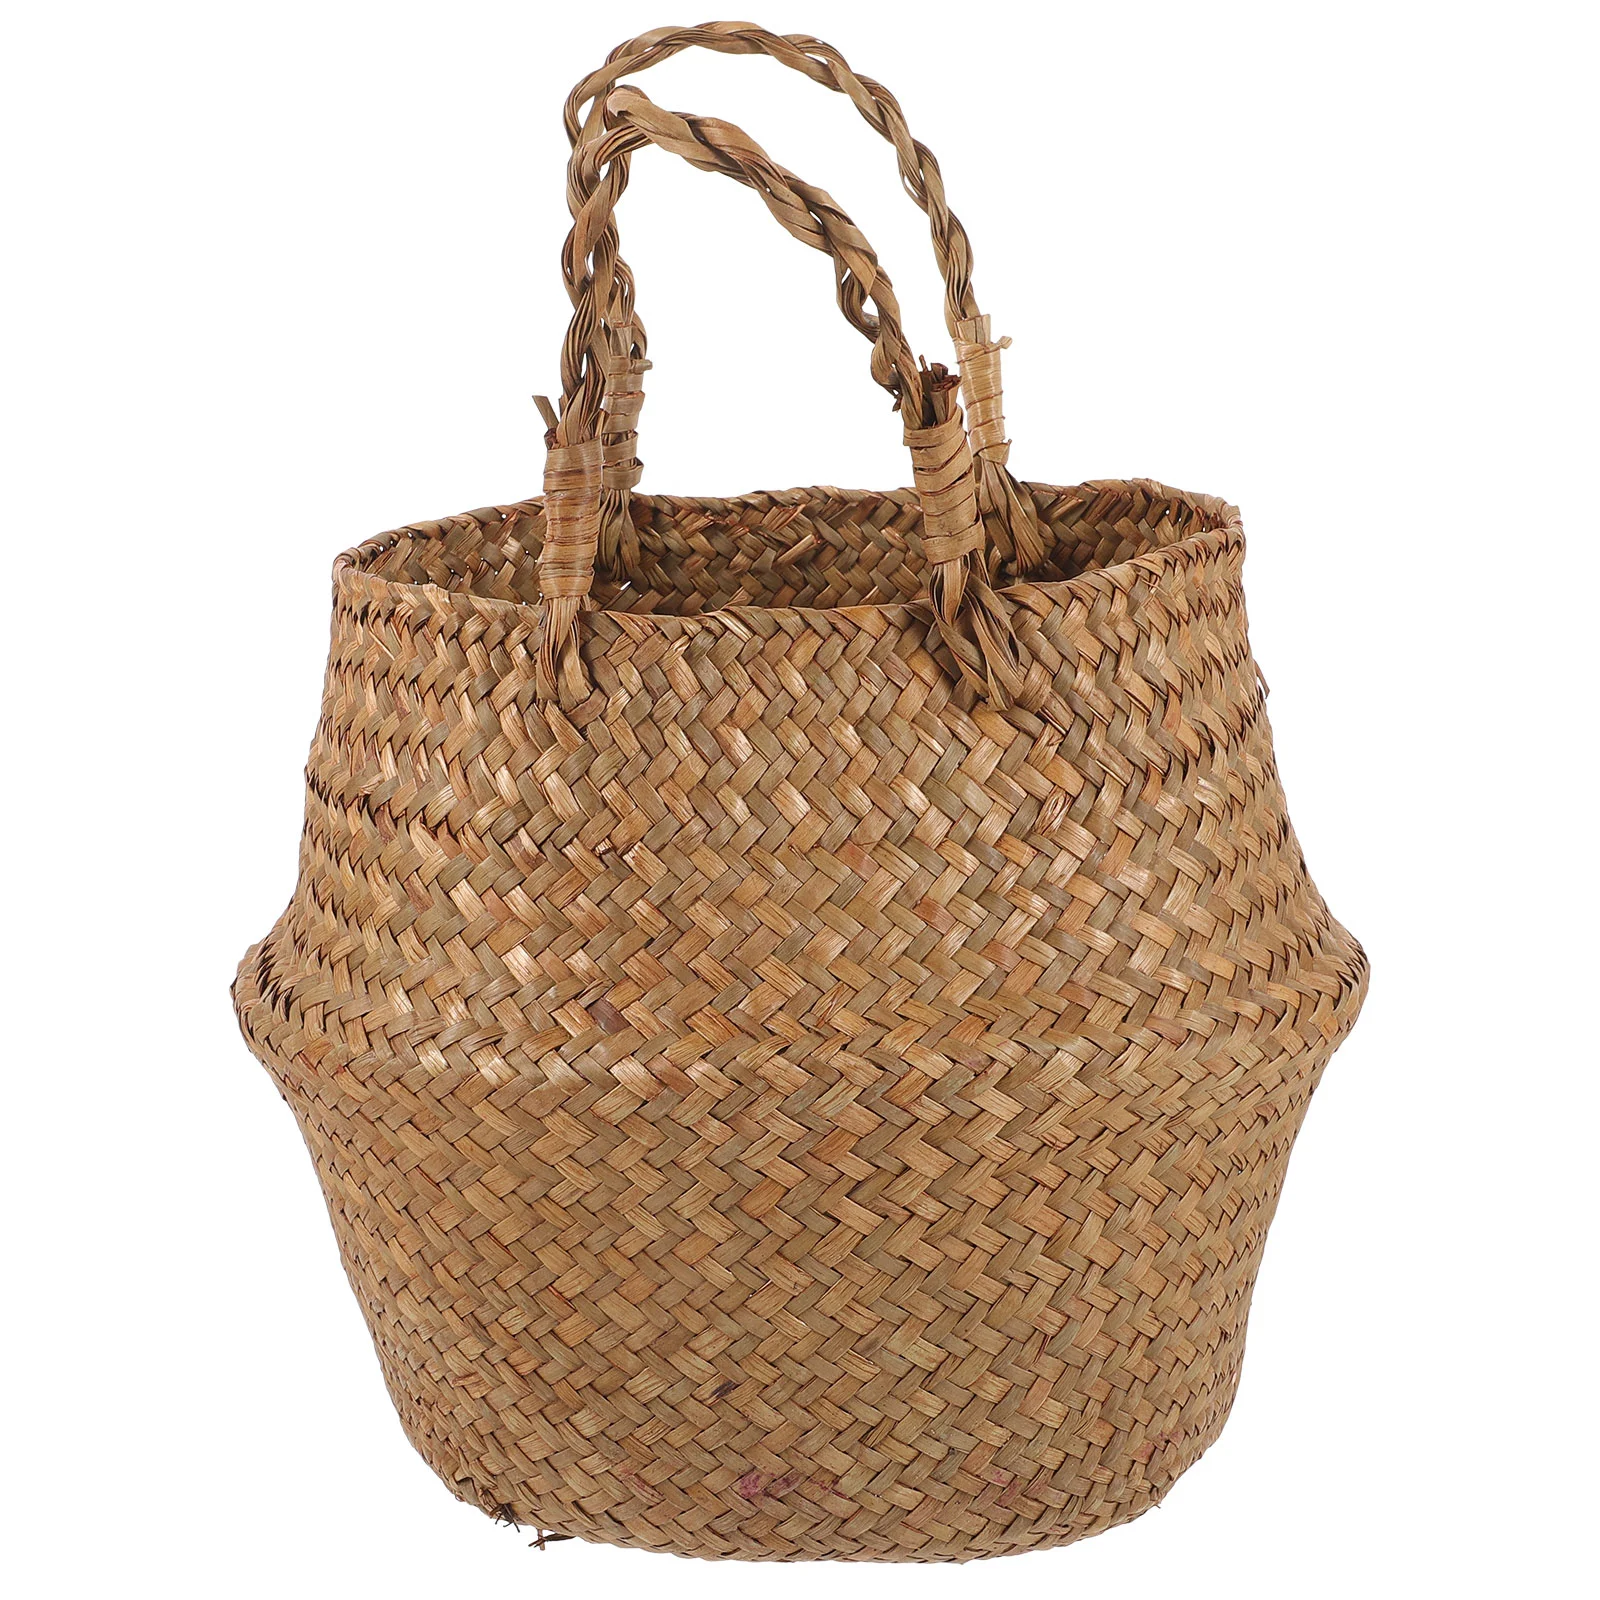 

Collapsible Laundry Basket Seagrass Woven Flower Small Round 22x20cm Handmade Storage Bin Seaweed Decorative Rope Baskets